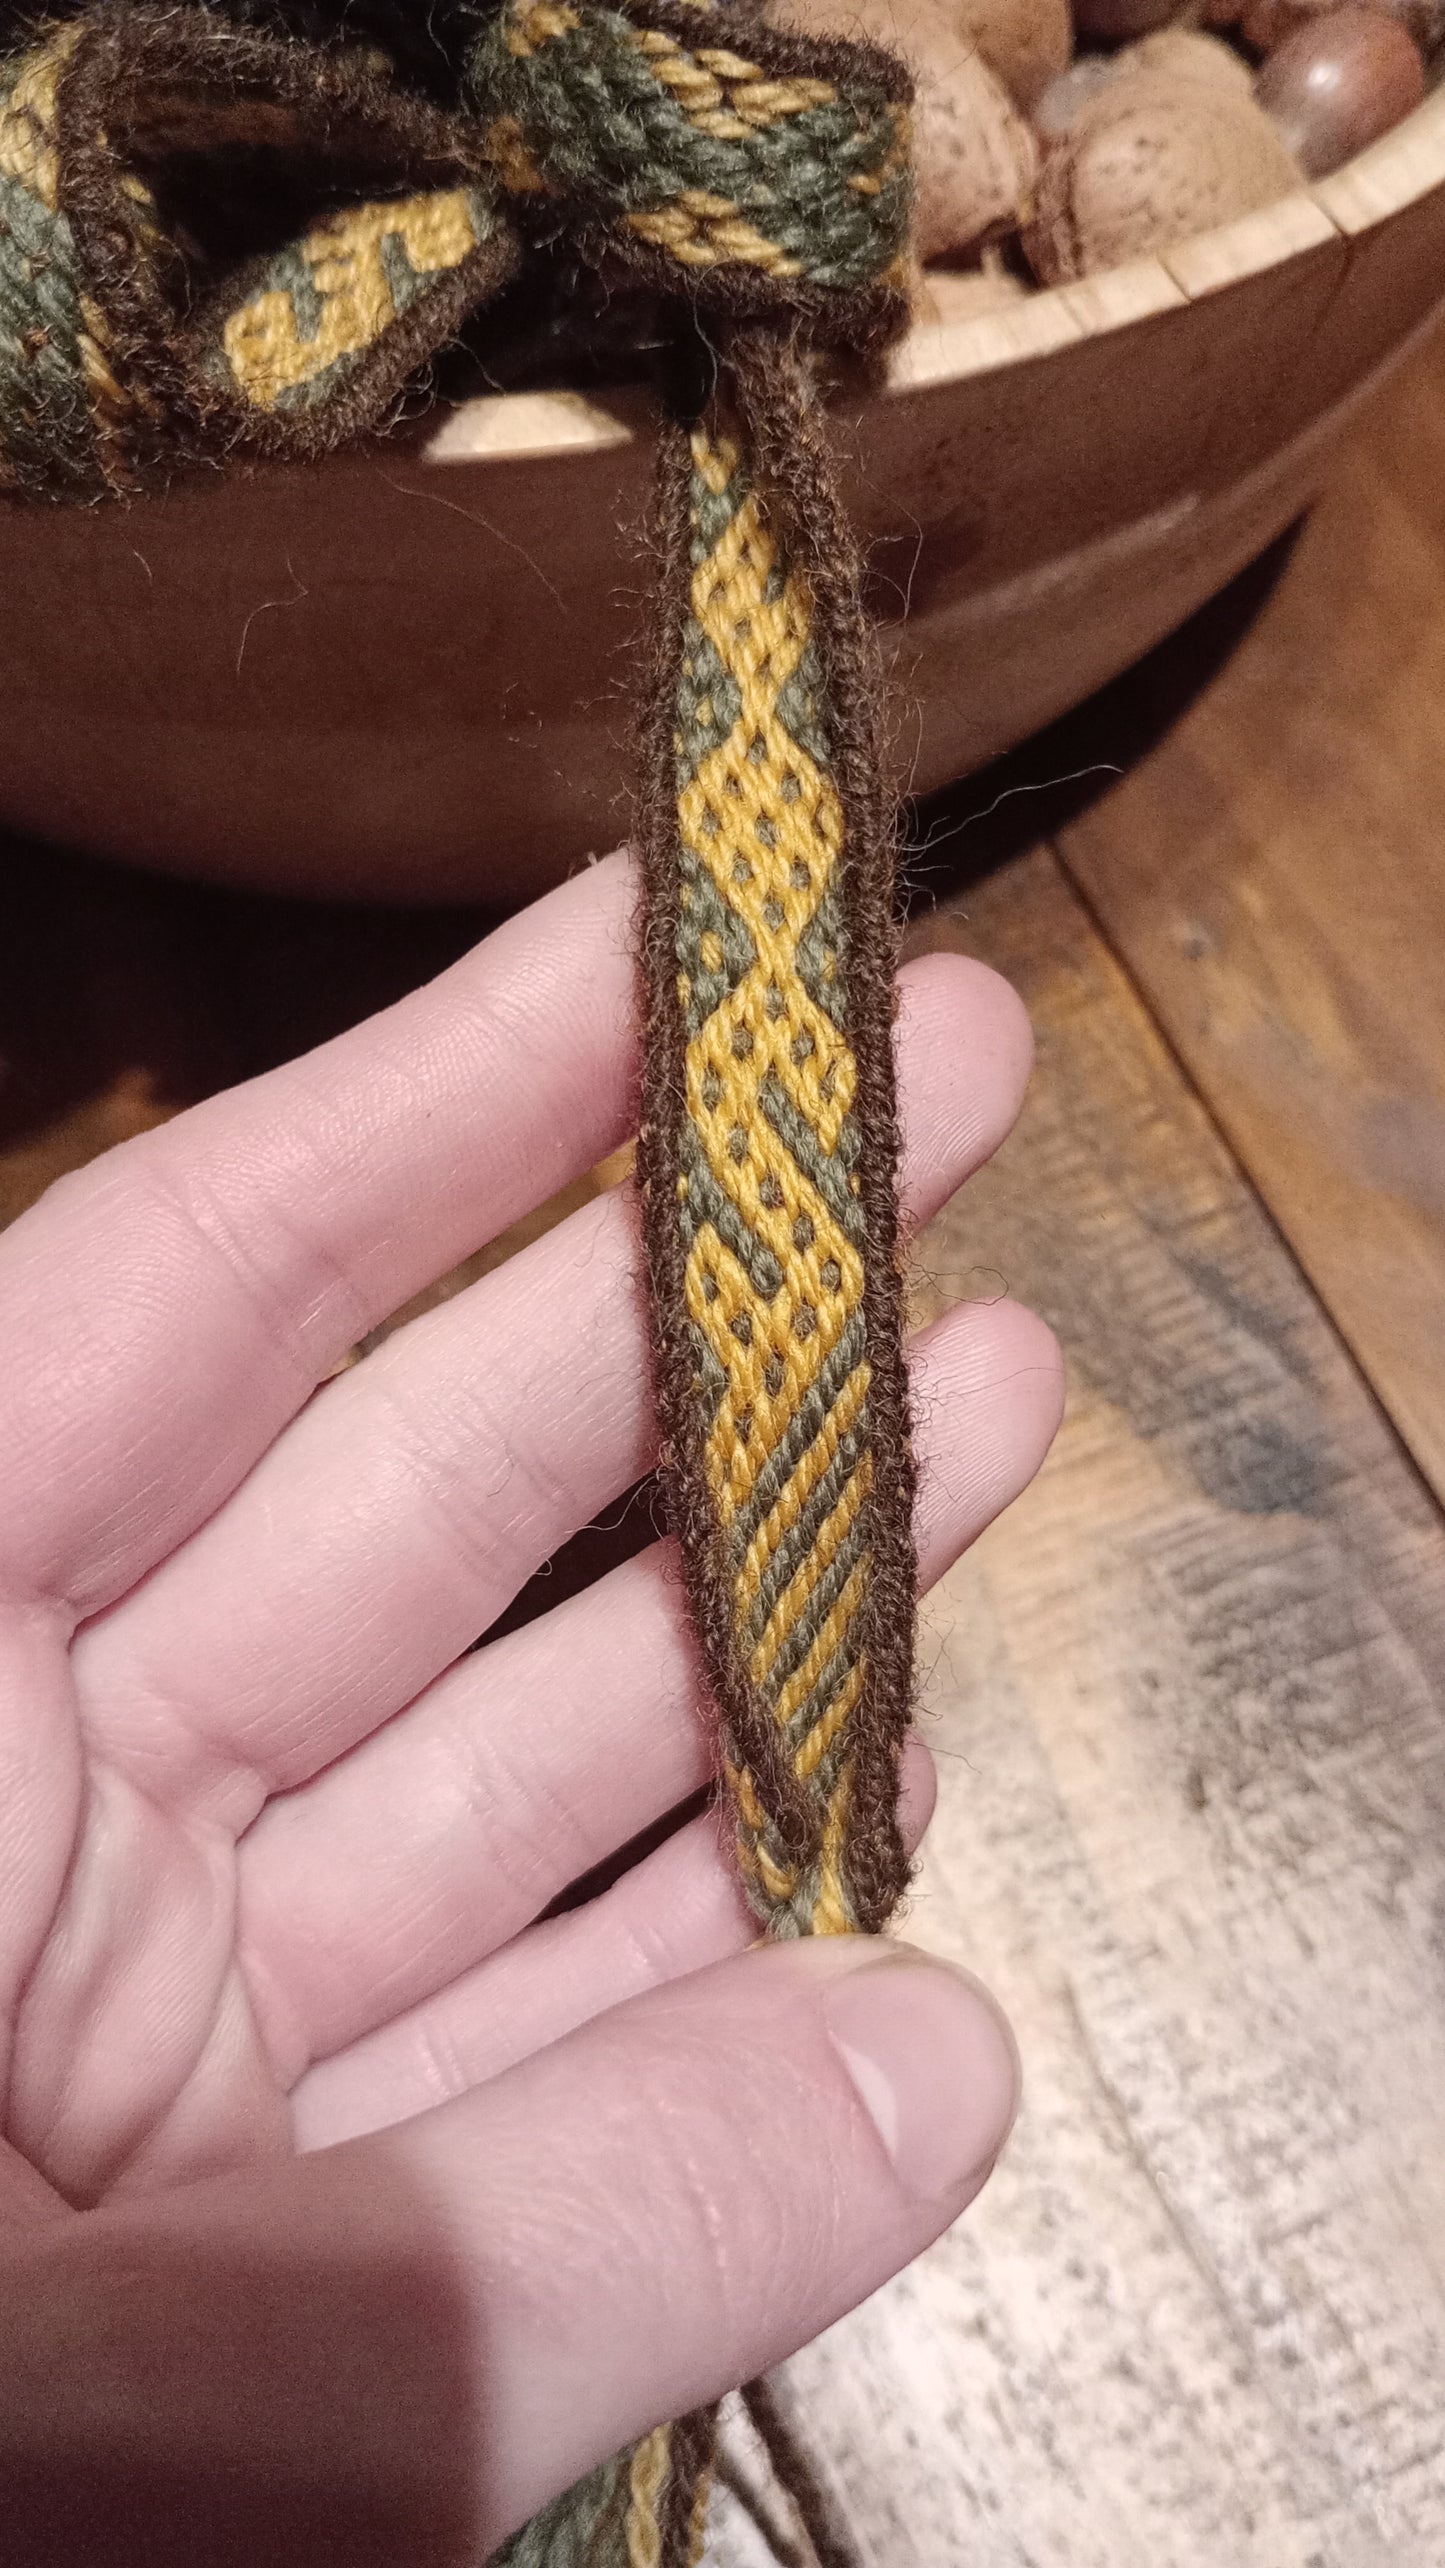 Tablet woven belt based on medieval band from Paragaudis, Lithuania